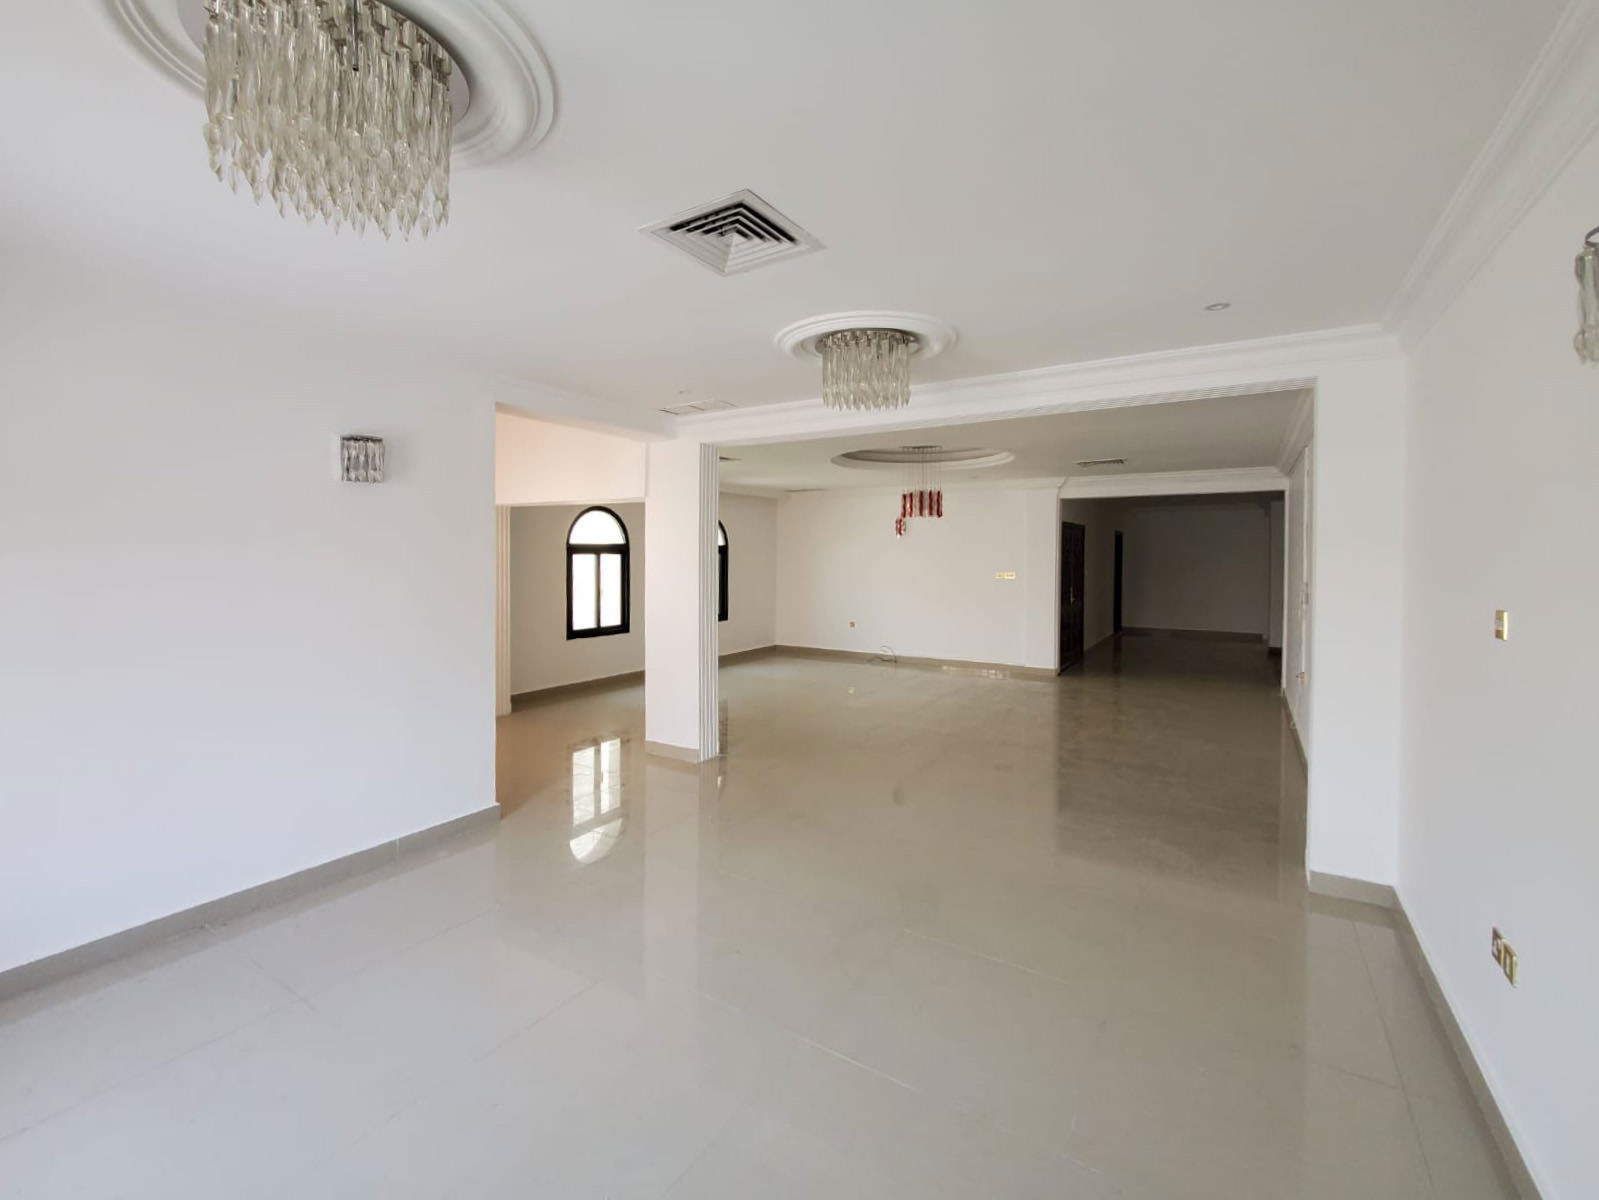 Jabriya – unfurnished, three bedroom floor w/large balcony and private entrance